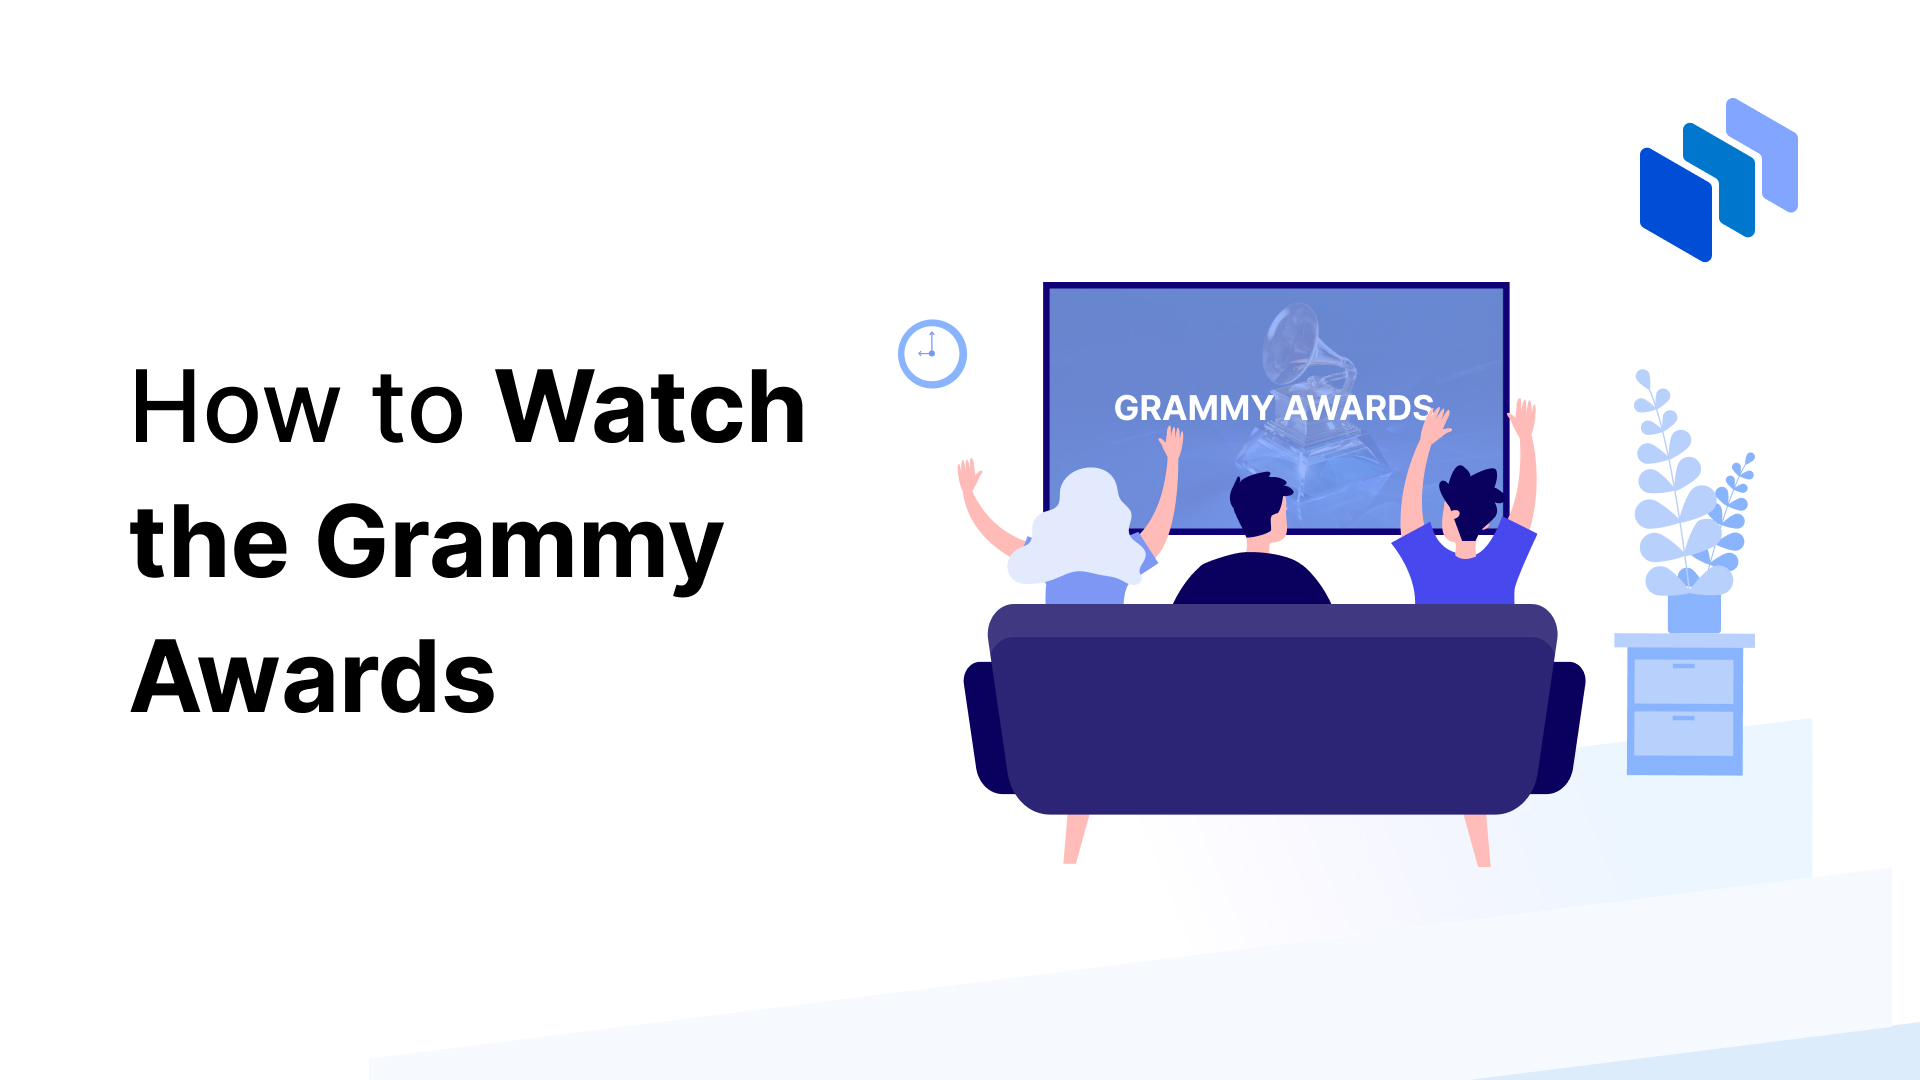 How to Watch the Grammy Awards